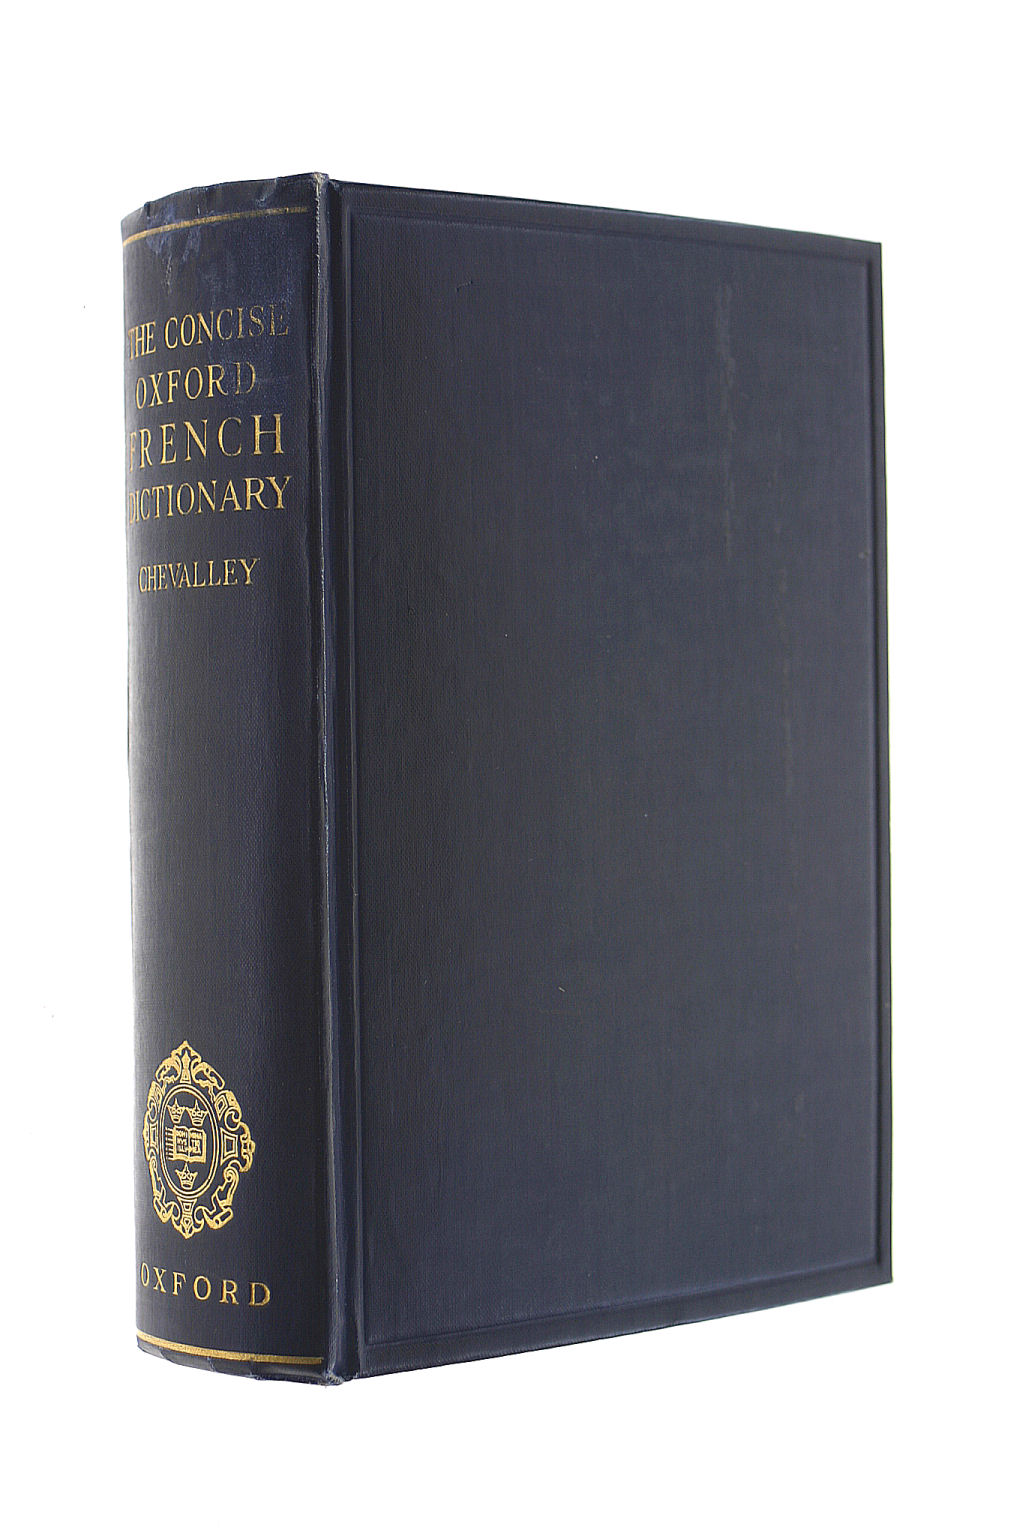 ABEL CHEVALLEY AND MARGUERITE CHEVALLEY - The Concise Oxford French Dictionary